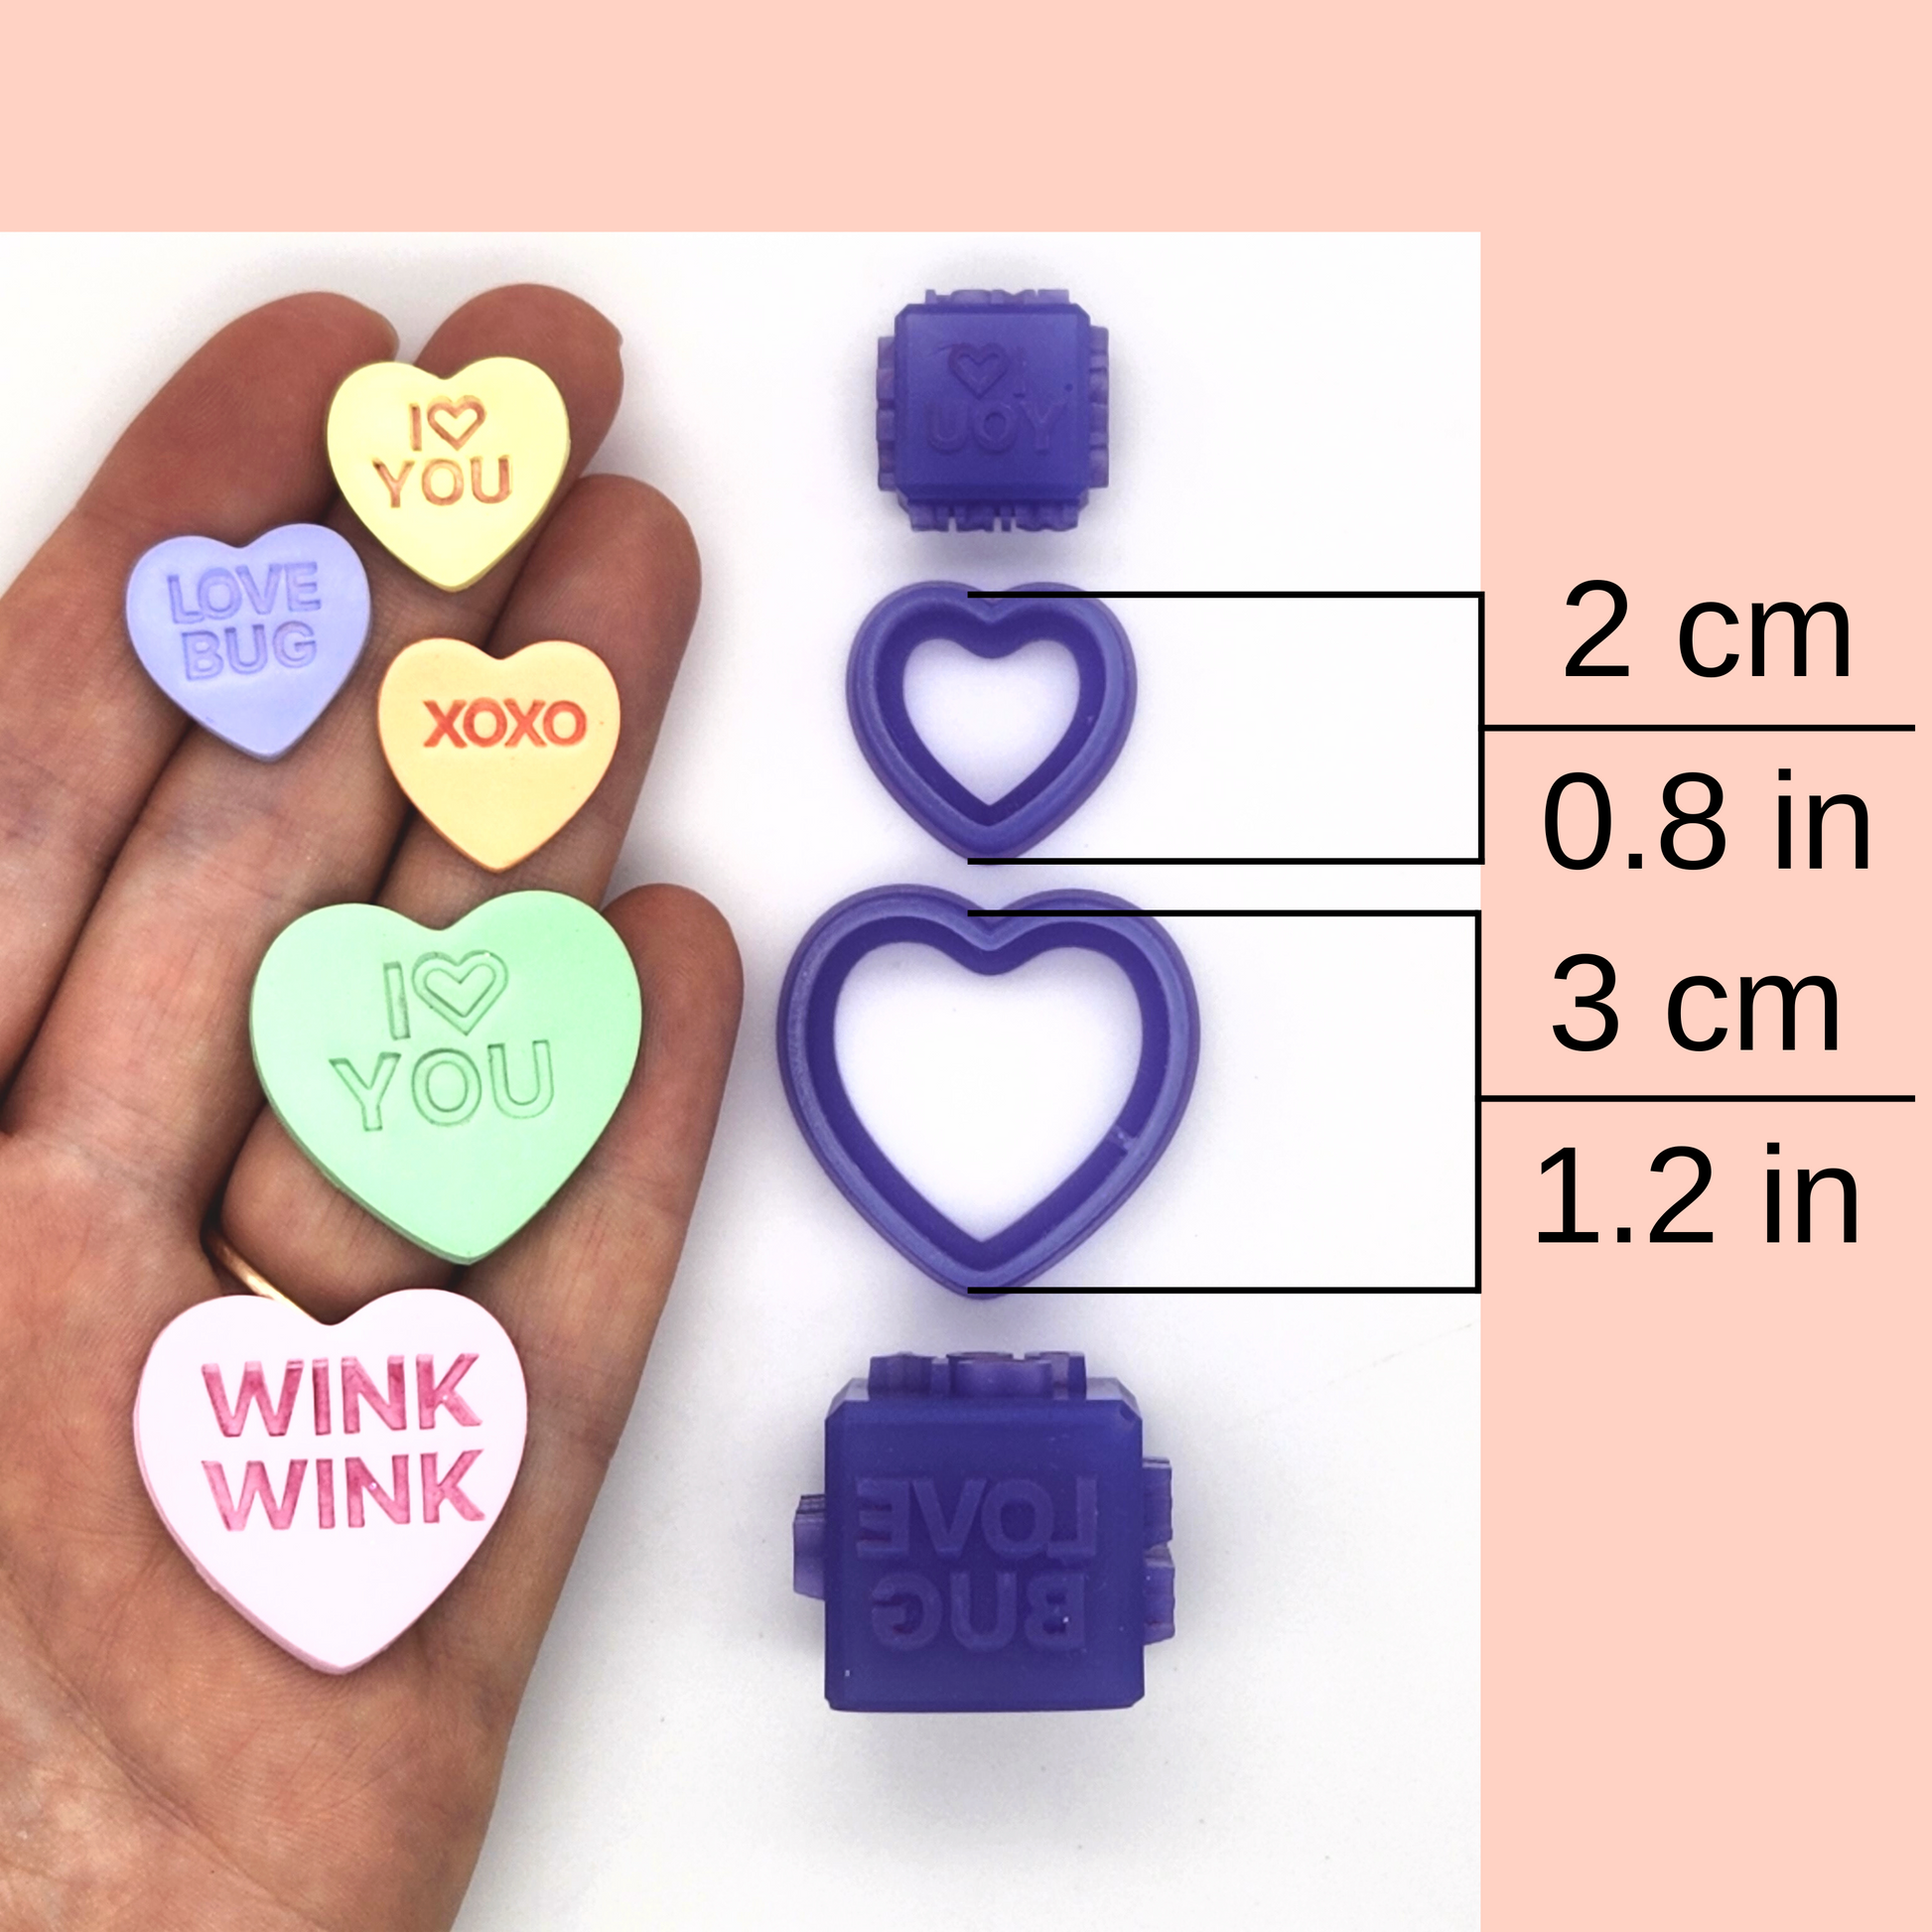 Sweethearts Debossing Cube and Cutter available clay cutter sizes, 2 centimeters / 0.8 inches, and 3 centimeters / 1.2 inches. In photo, sample finish product with Sweethearts Debossing Cube and Cutter in two different sizes